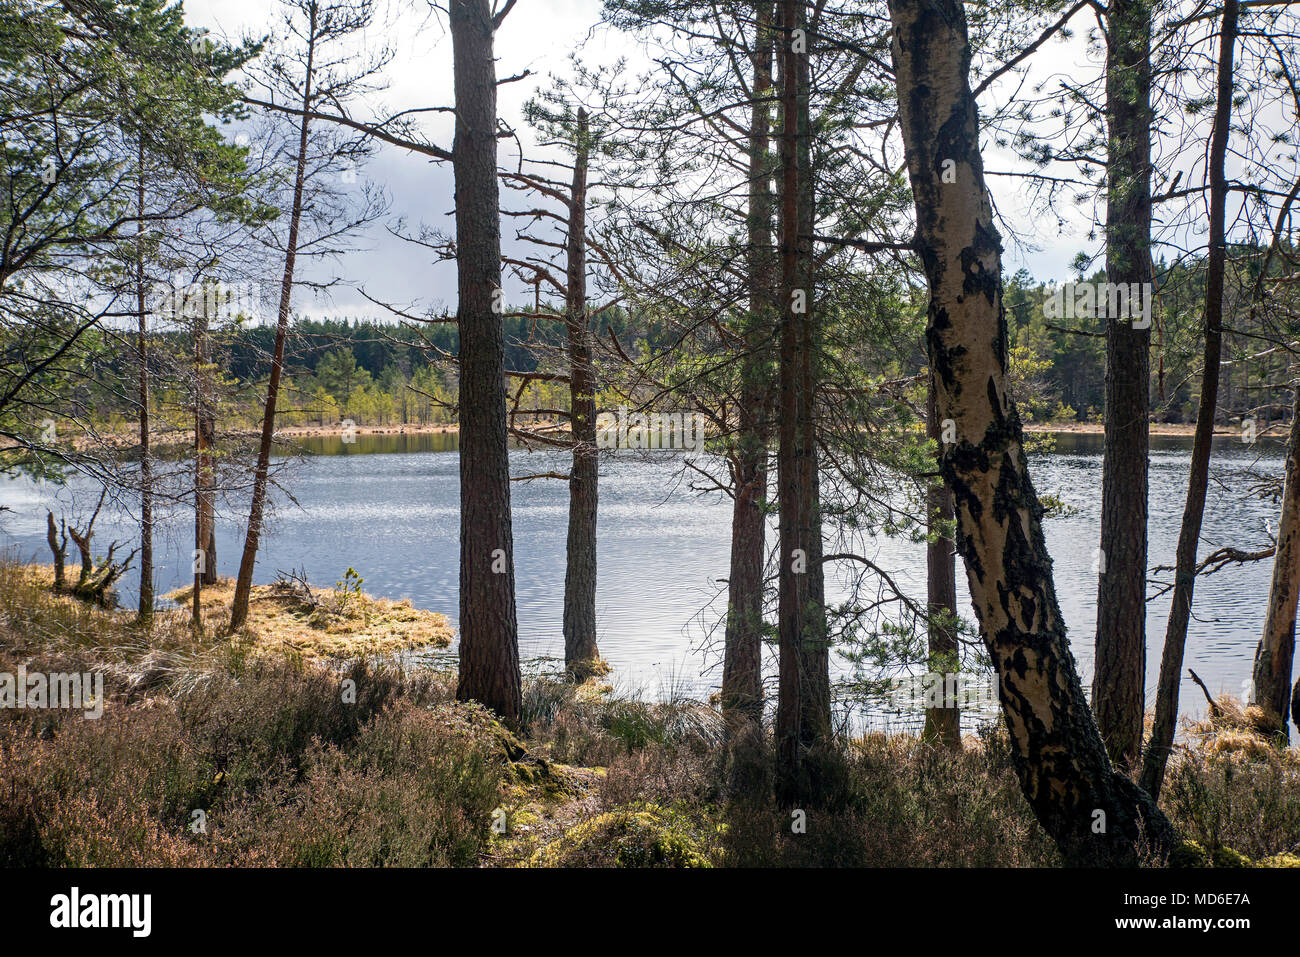 Uath Lochans, Inshriach Forest, Glenfeshie south of Kincraig in Cairngorm National Park. Stock Photo